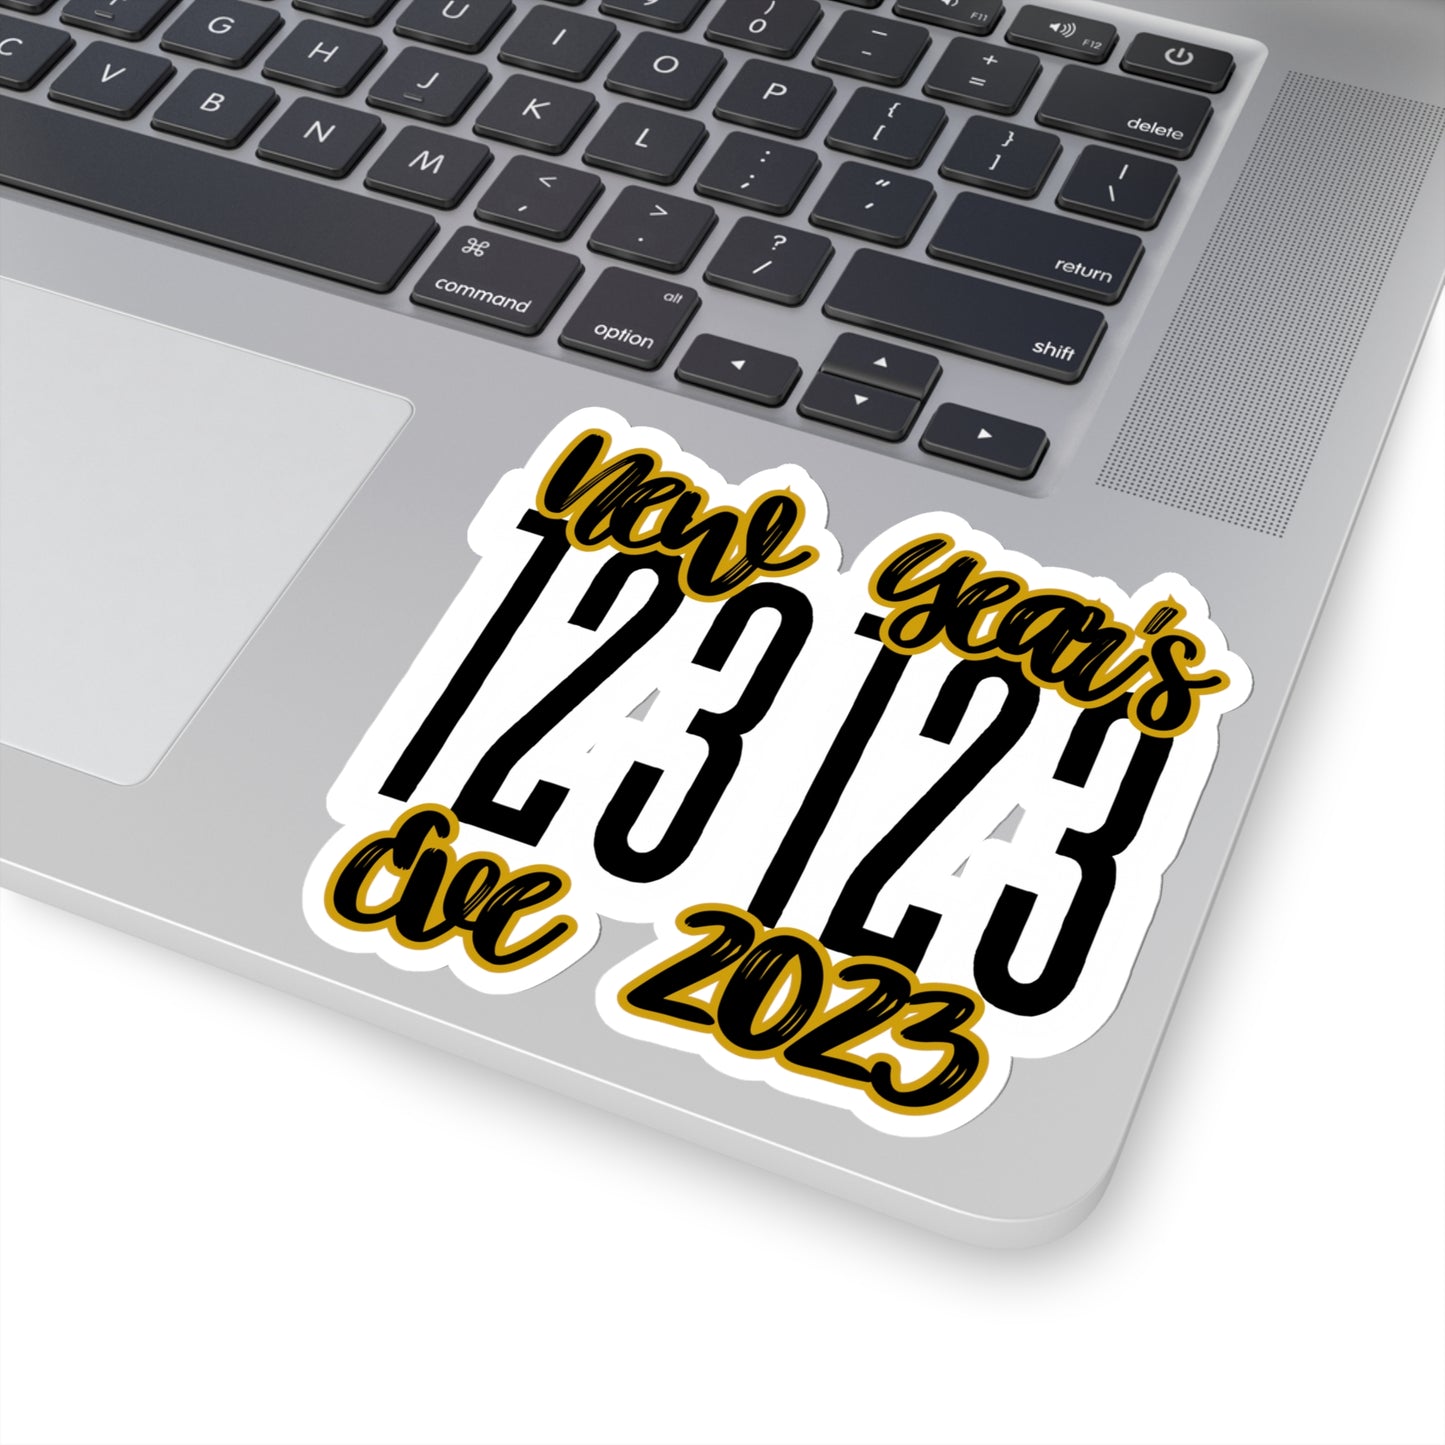 New Year’s Eve 123123 Kiss-Cut Stickers